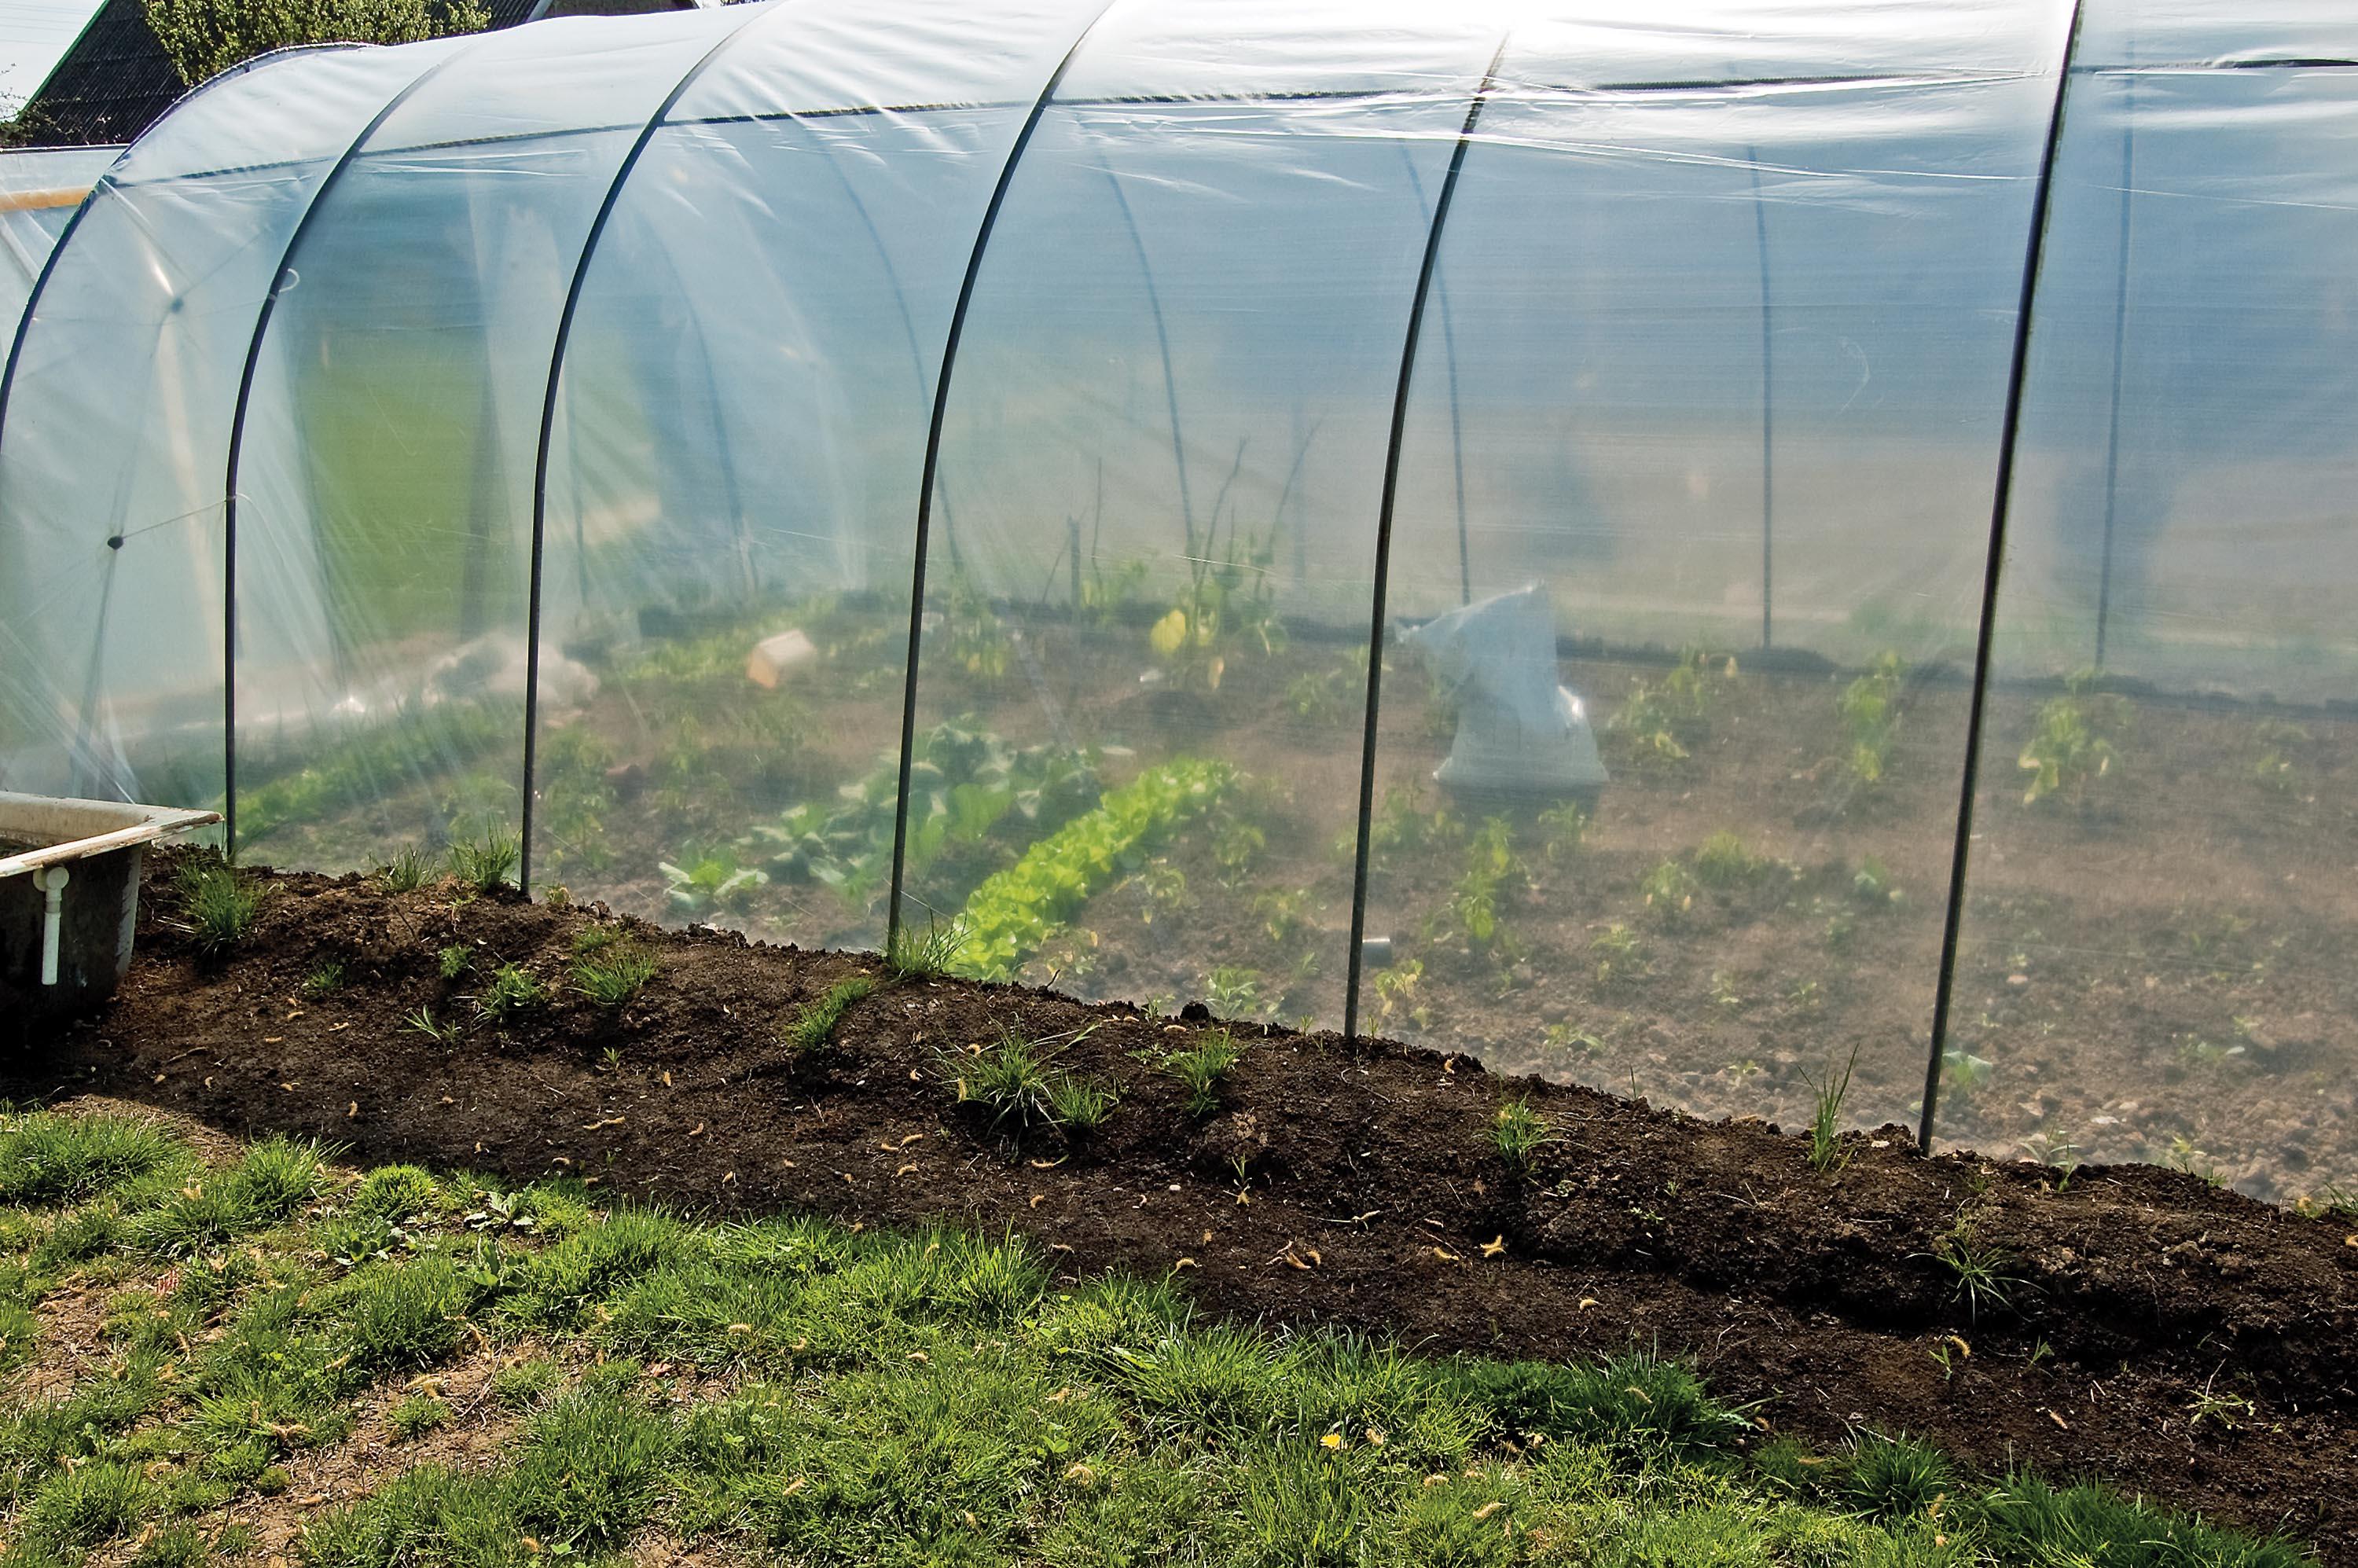 Farming in the City | College of Agriculture & Natural Resources at UMD